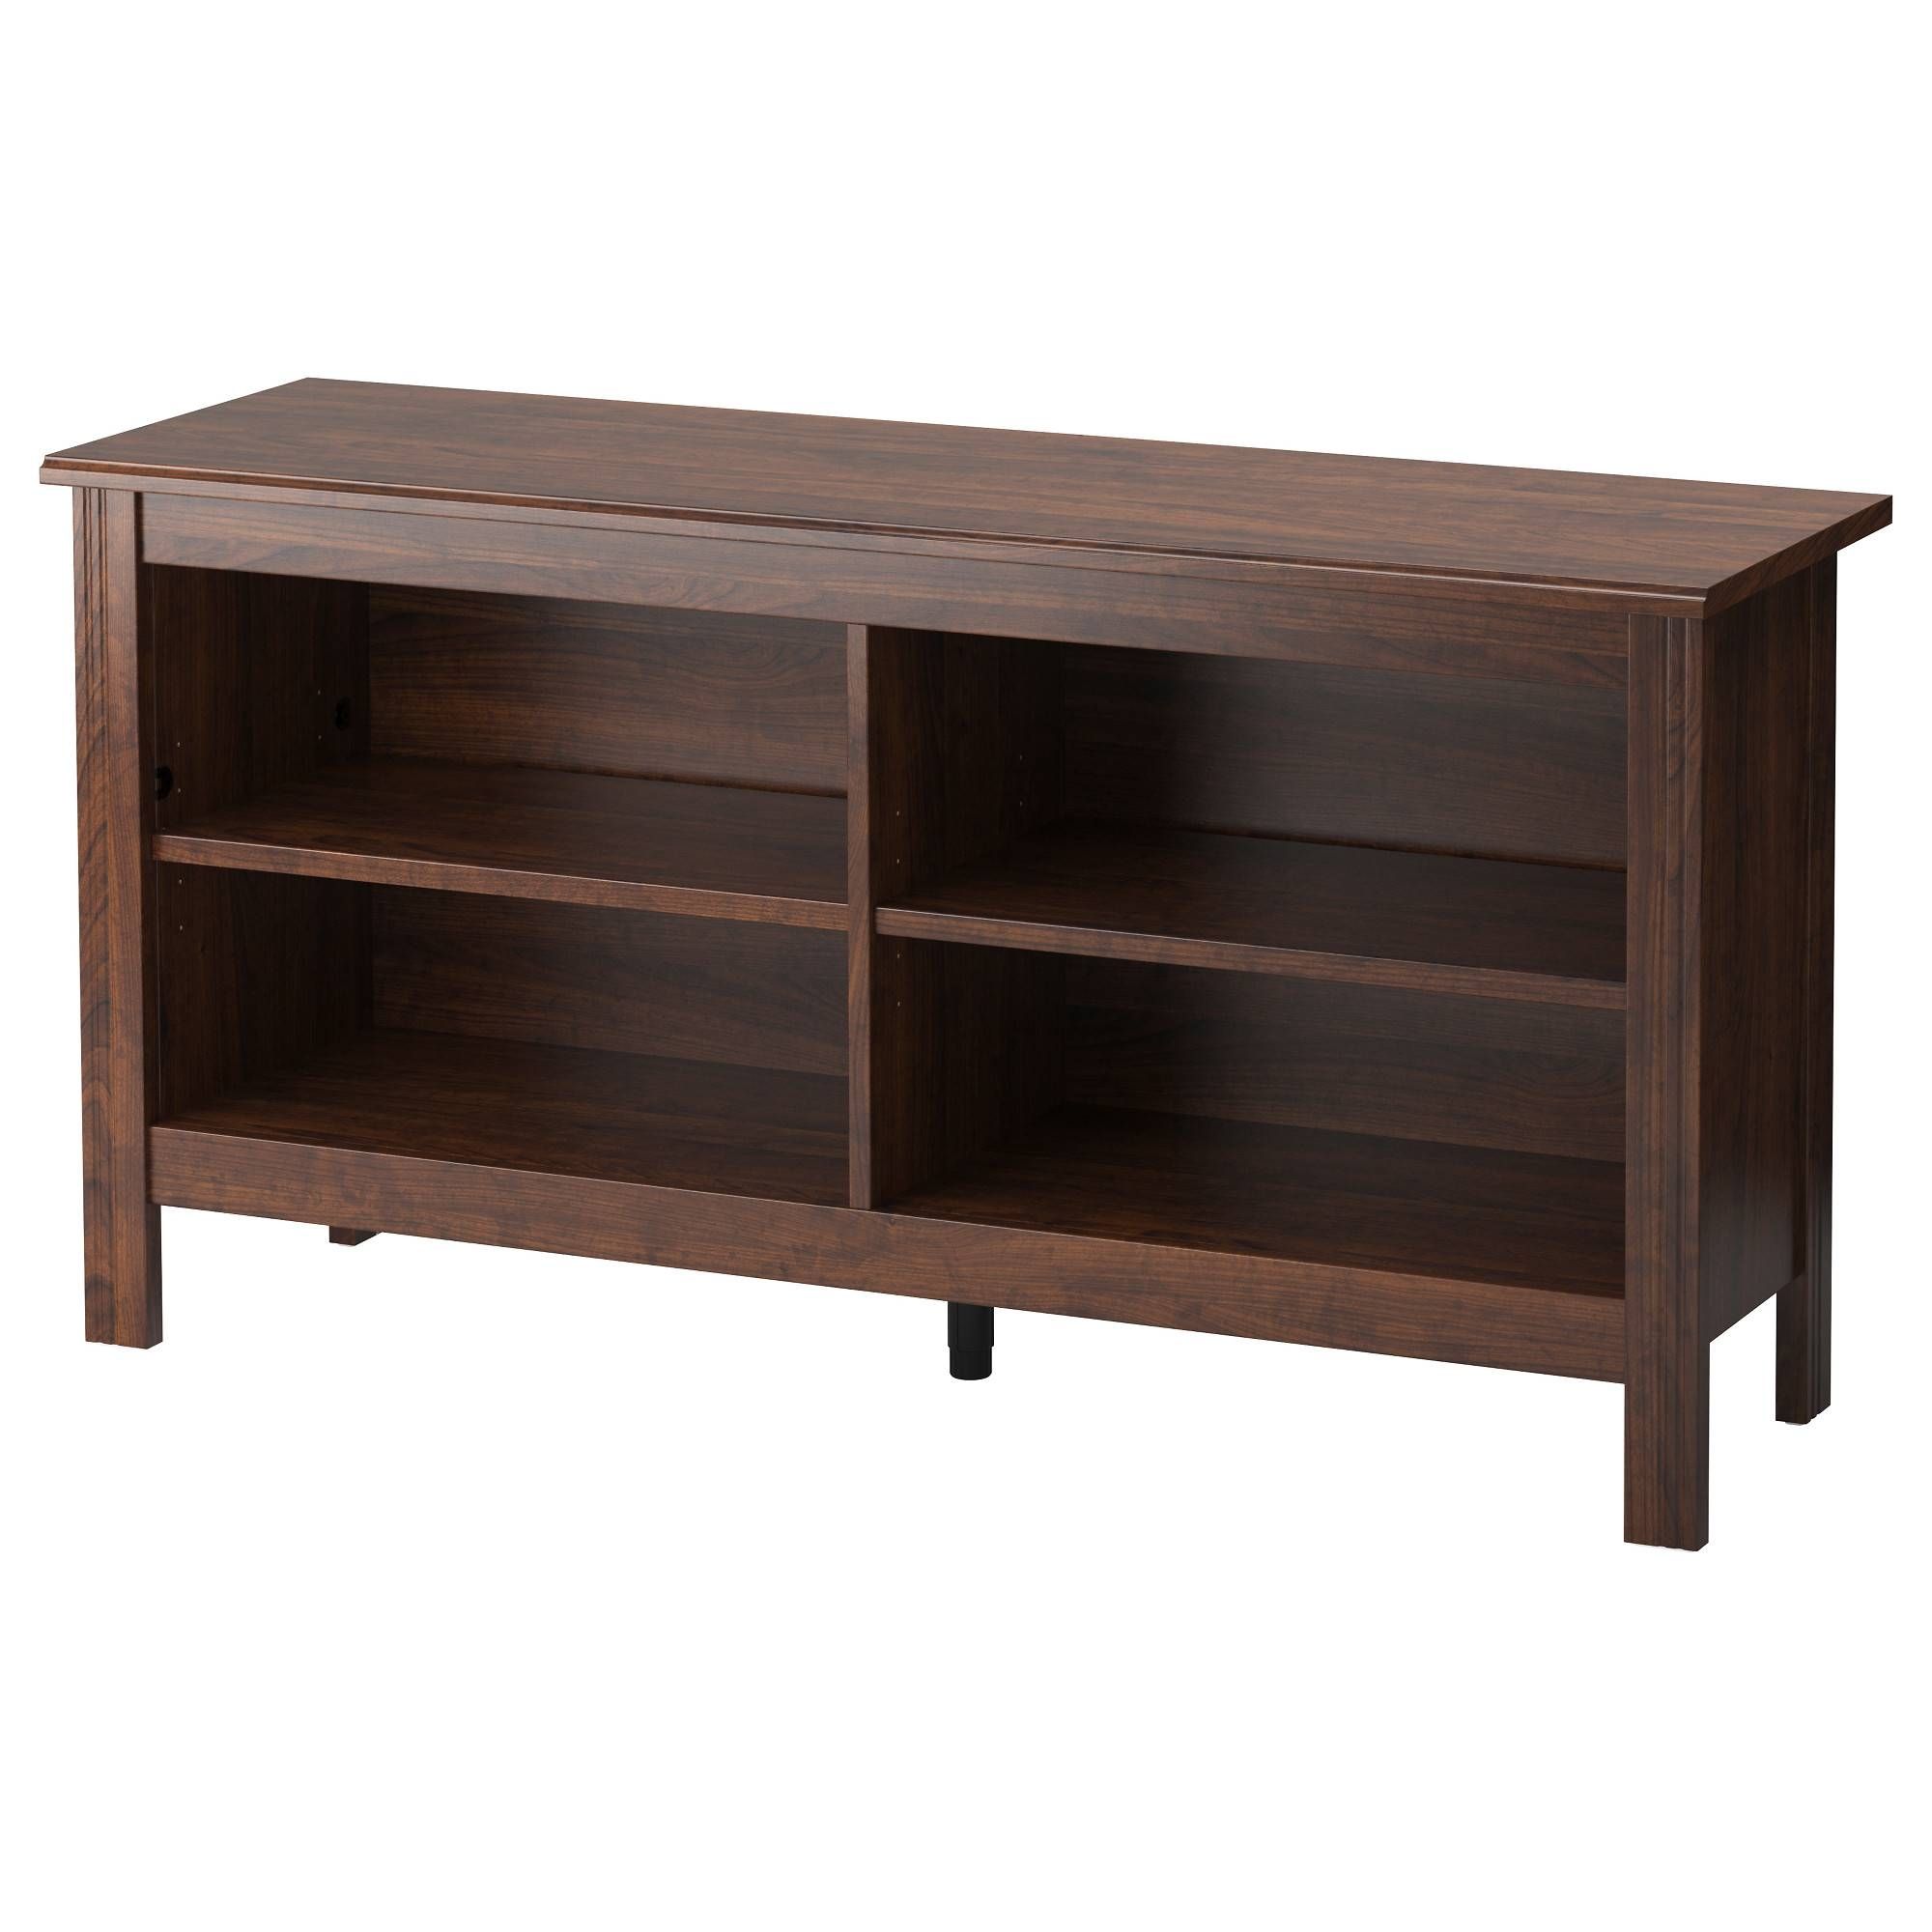 Brusali Tv Unit – Brown – Ikea With Regard To 24 Inch Deep Tv Stands (View 3 of 15)